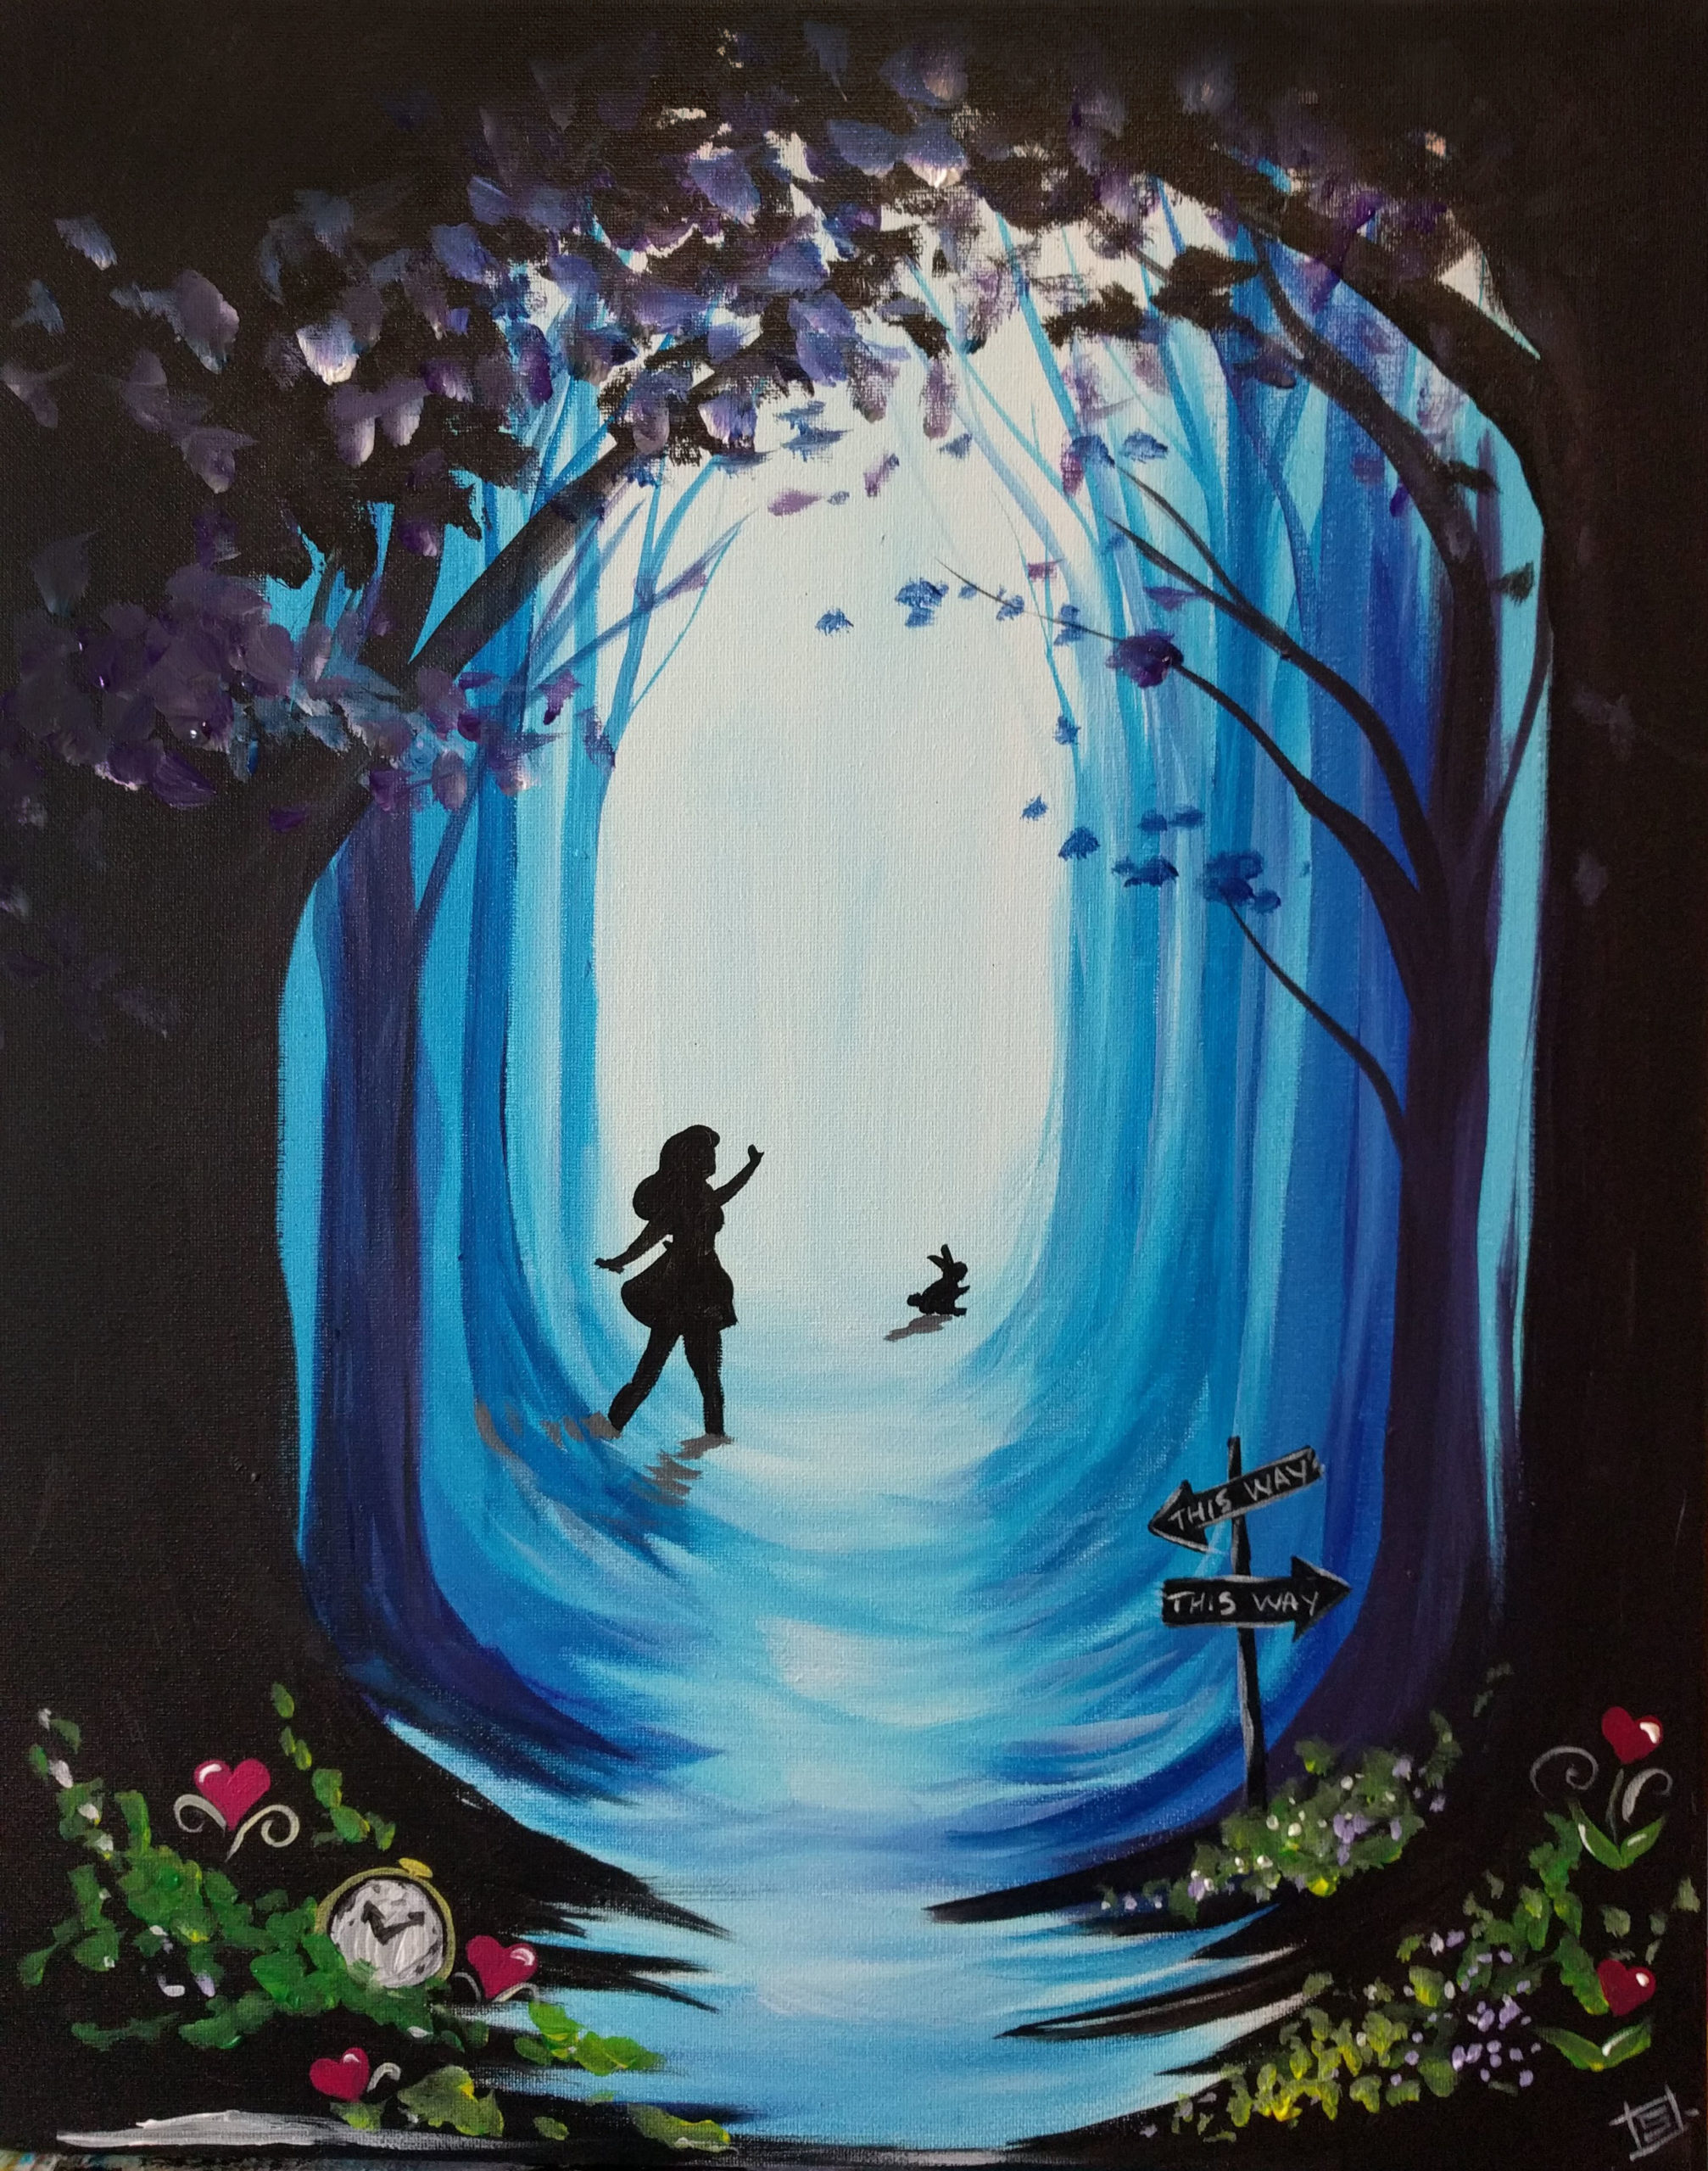 Whimsy Paint & Sip Art Studio Orchard - Westminster, CO - Wednesday, March  23rd @ 6:30pm SPECIALTY: Wine Glass Painting It's about time for another  round of wine glass painting. Join us